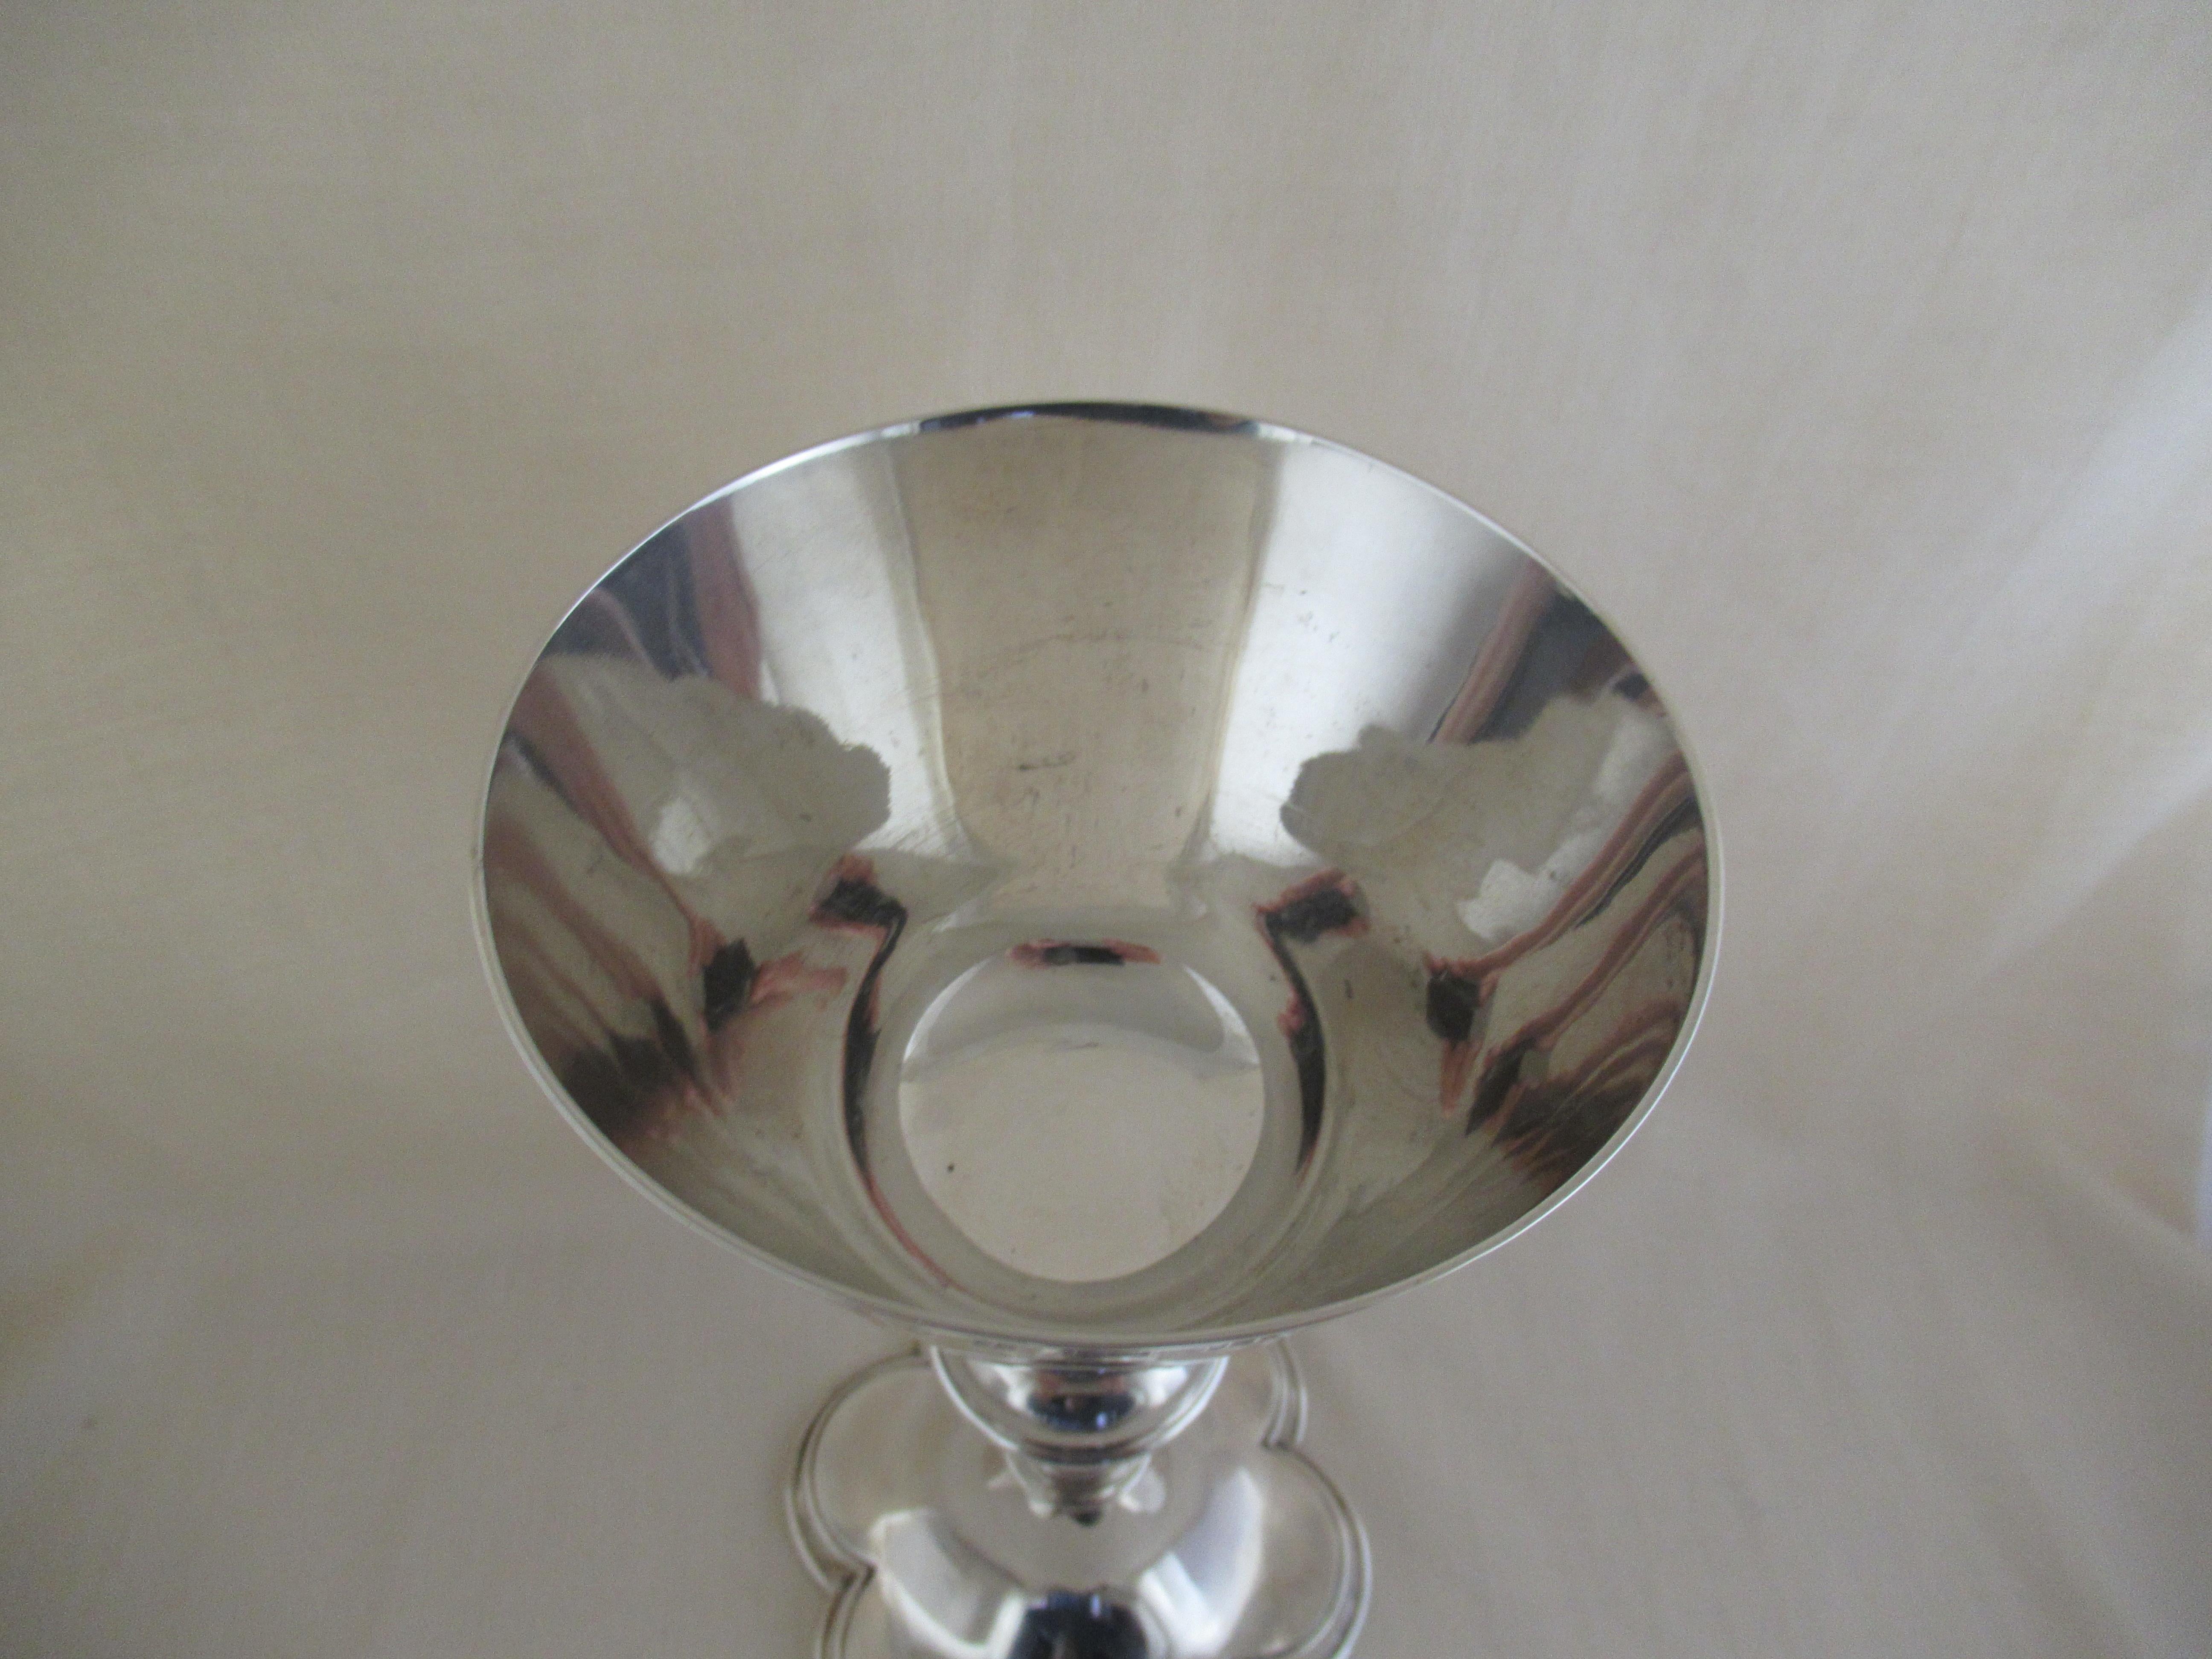 English sterling silver - LARGE ECCLESIASTICAL CHALICE
Full set of English hallmarks applied by the Birmingham Assay Office -
 Lion - Sterling silver guarantee mark.
 Anchor - Birmingham Assay Office
 Lower case f - Birmingham date letter for